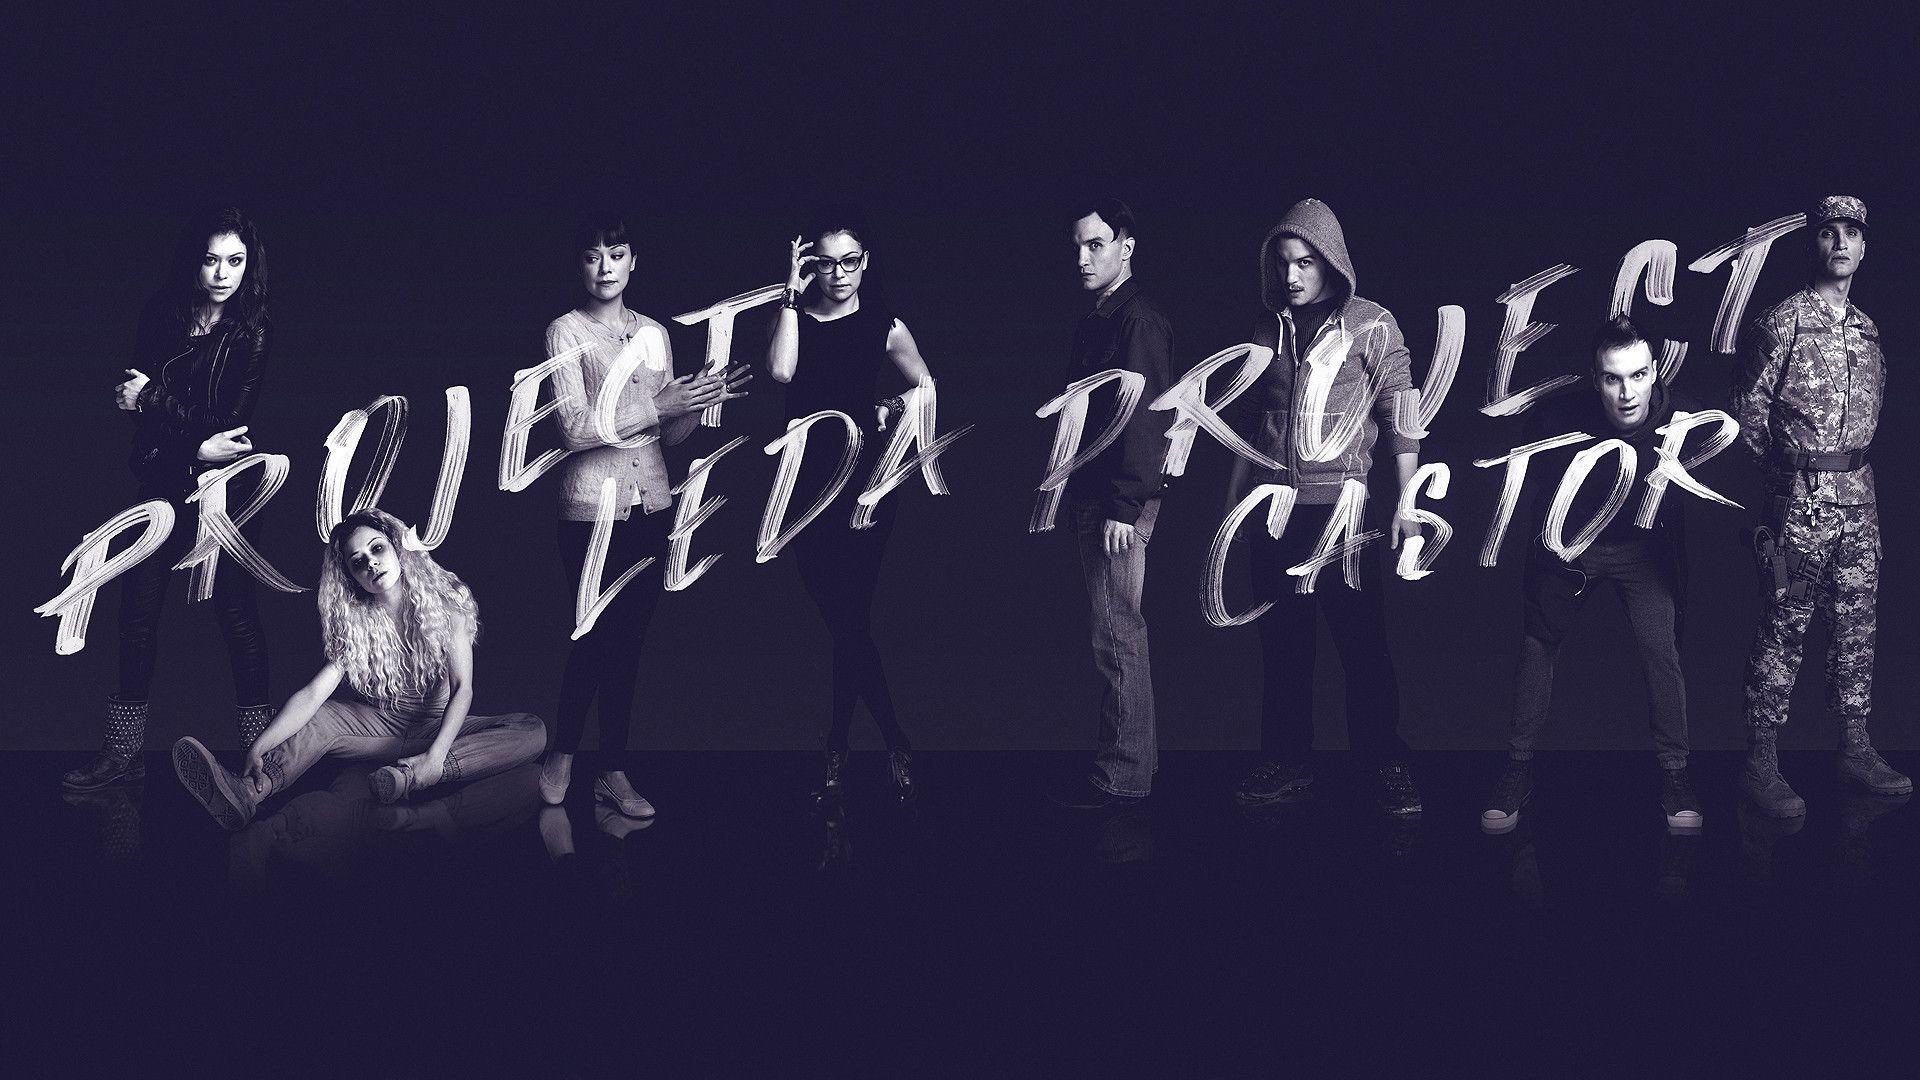 Some Orphan Black Wallpaper I Made Today